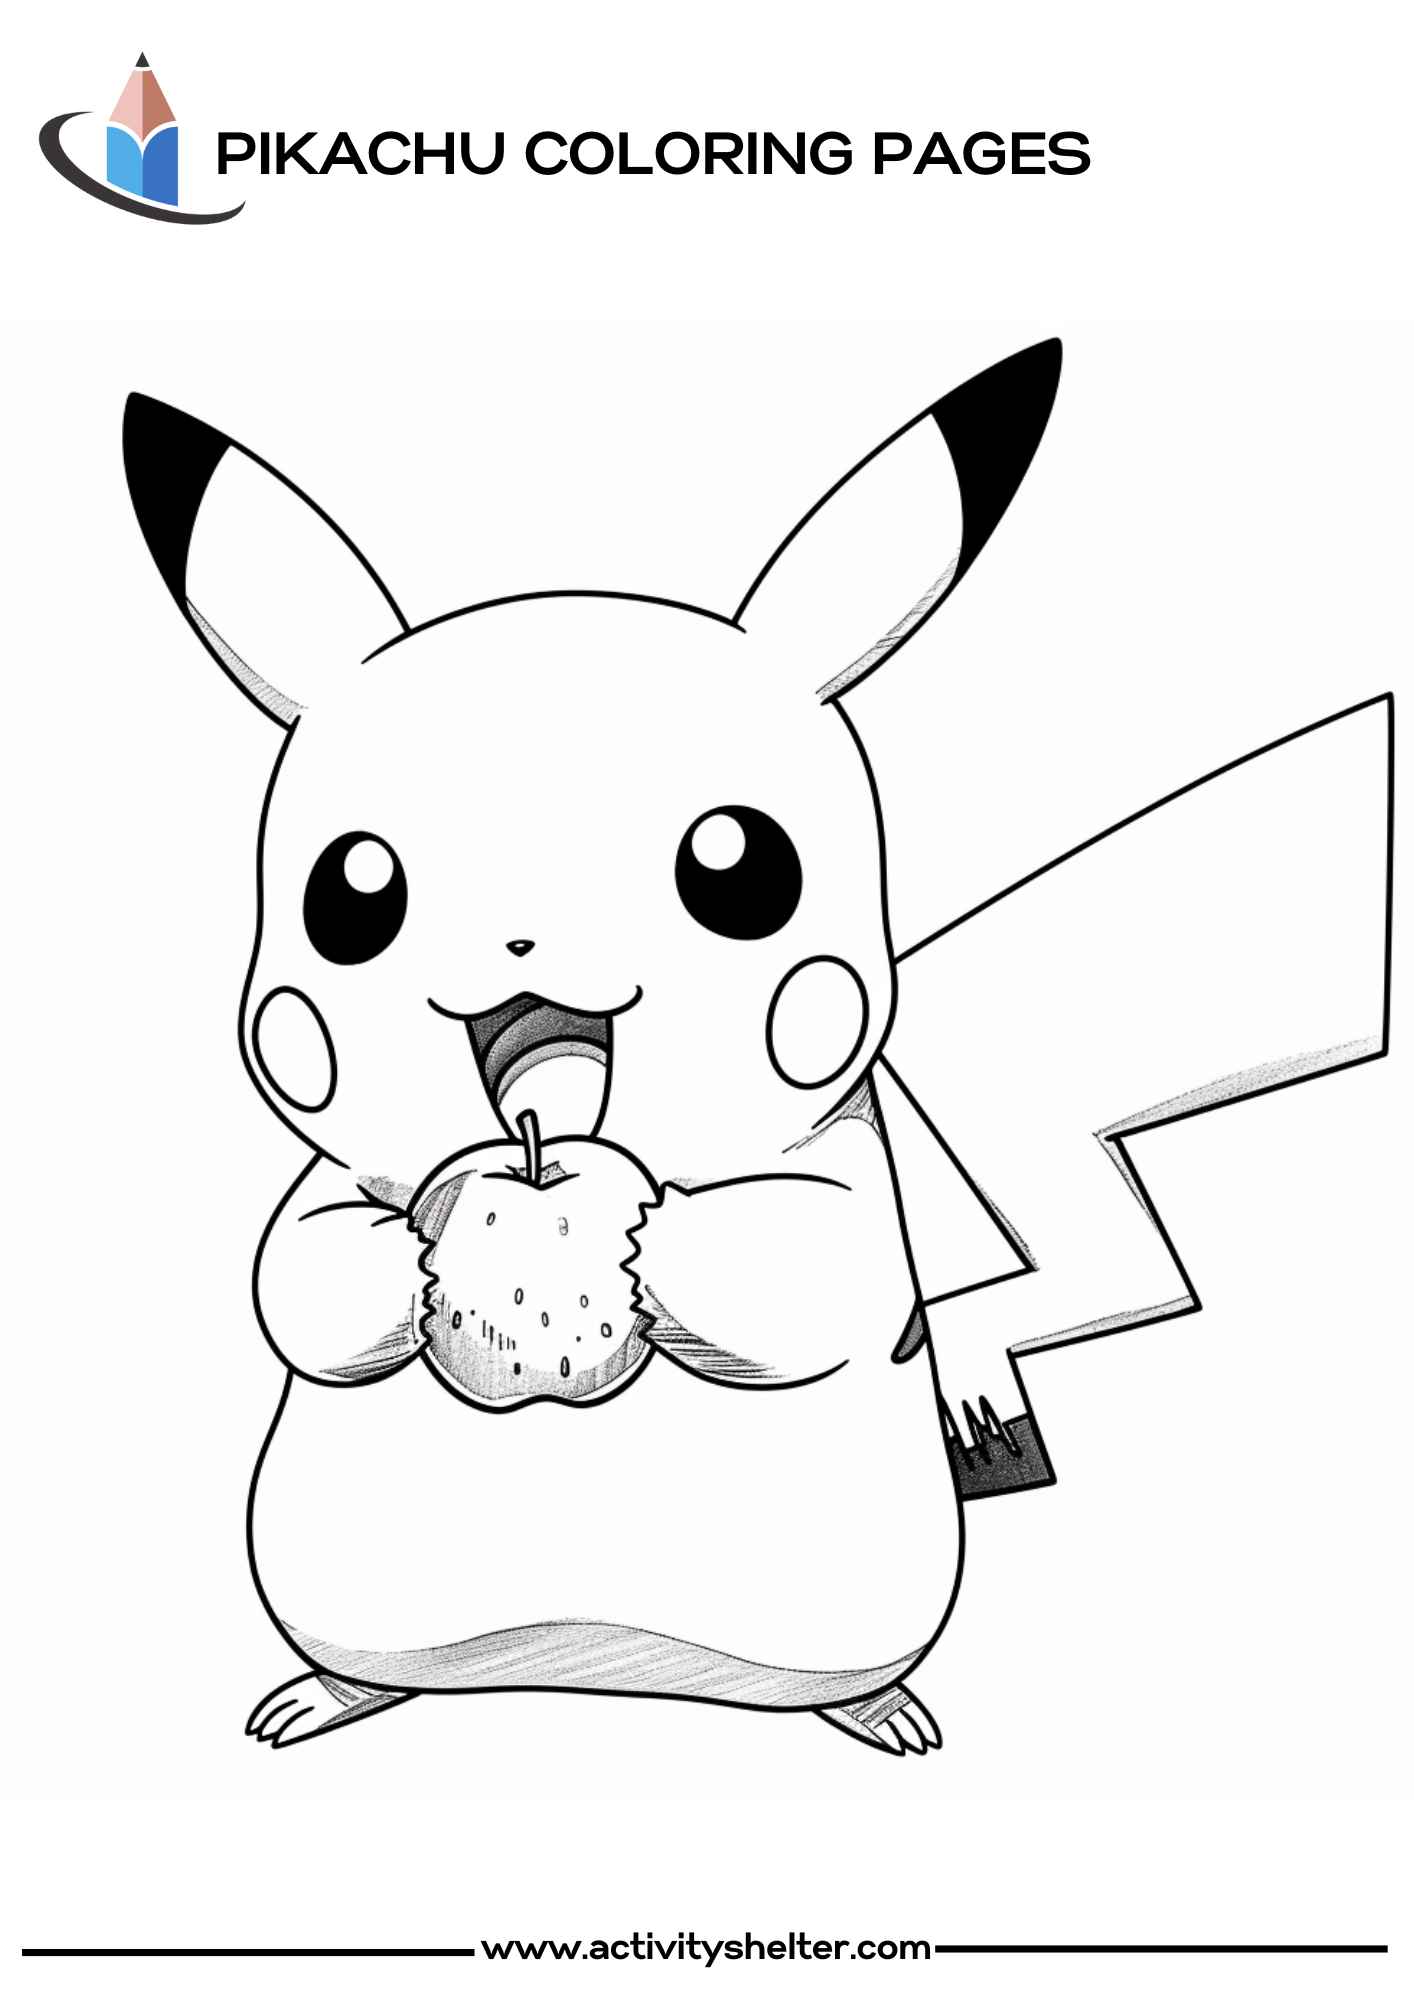 Coloring Pages Pikachu Eating an Apple